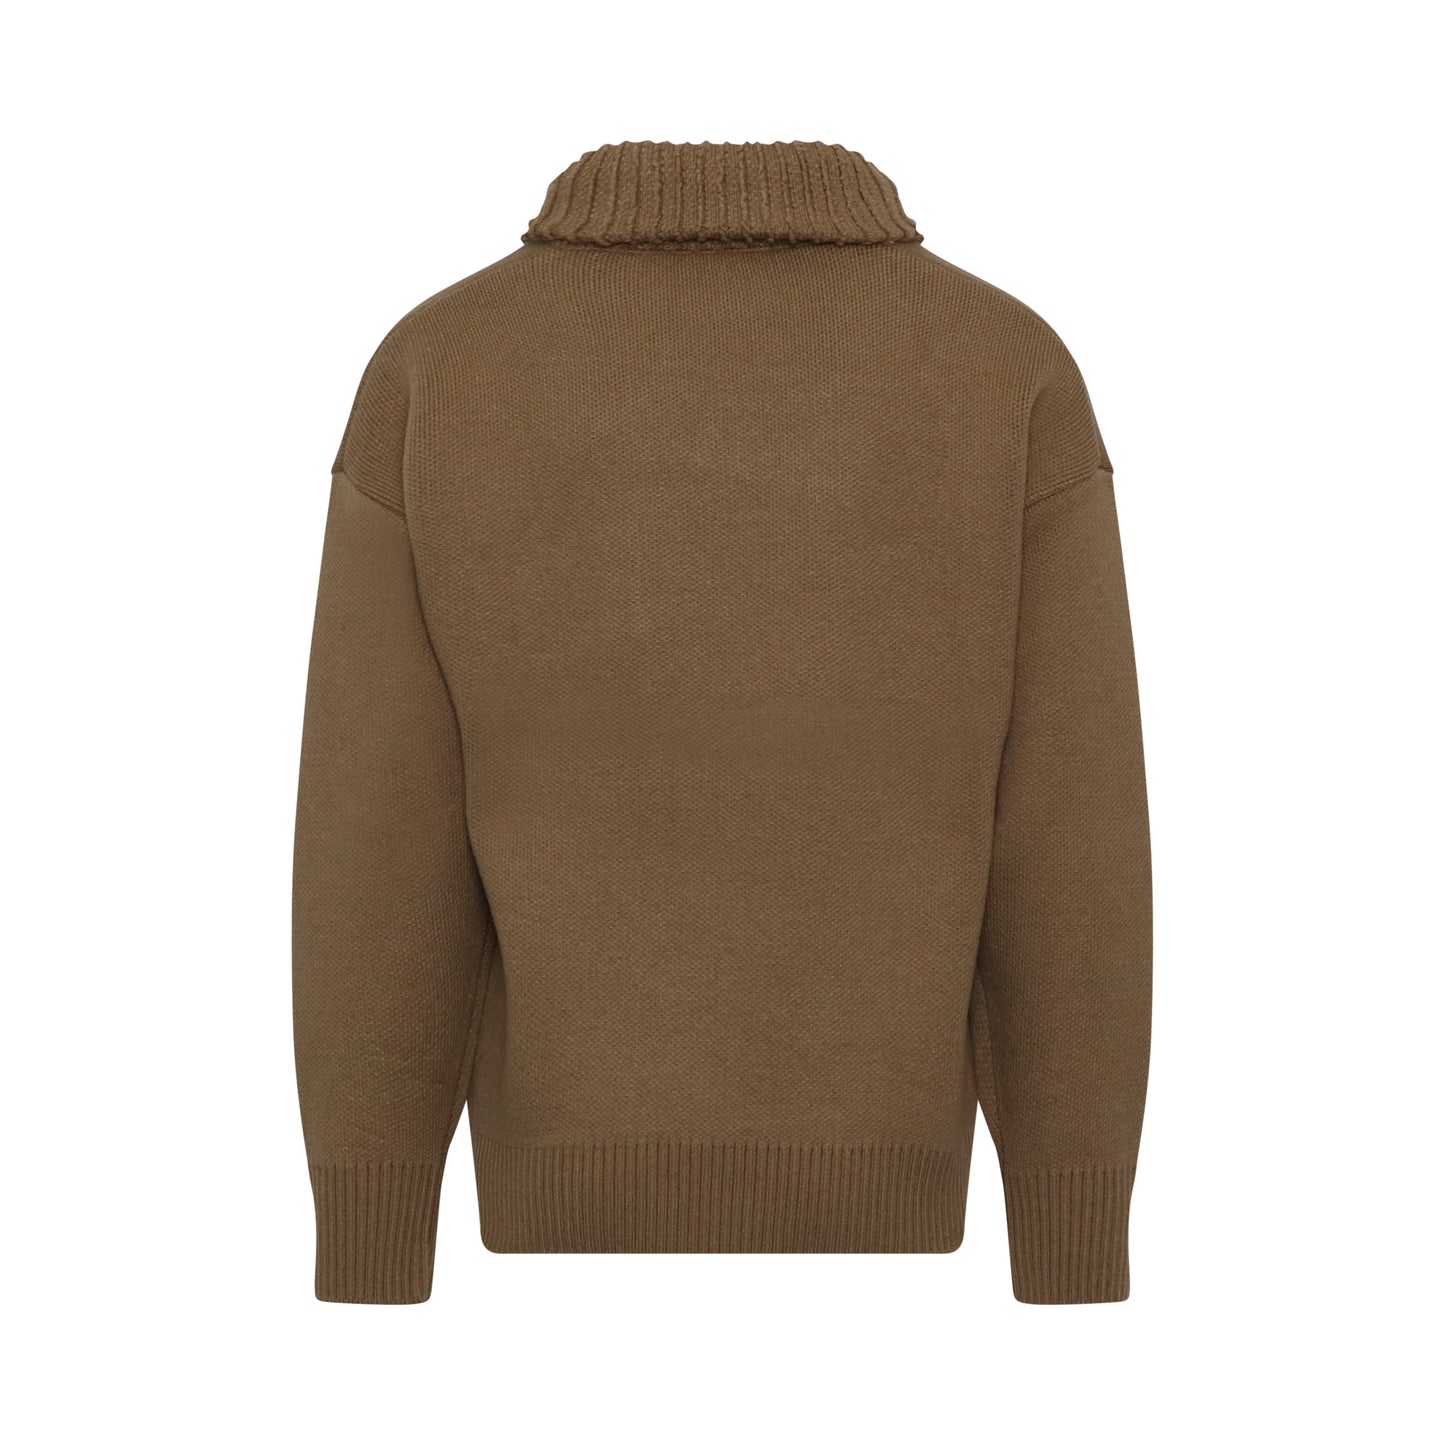 Square Logo Pile Knit Sweater in Brown